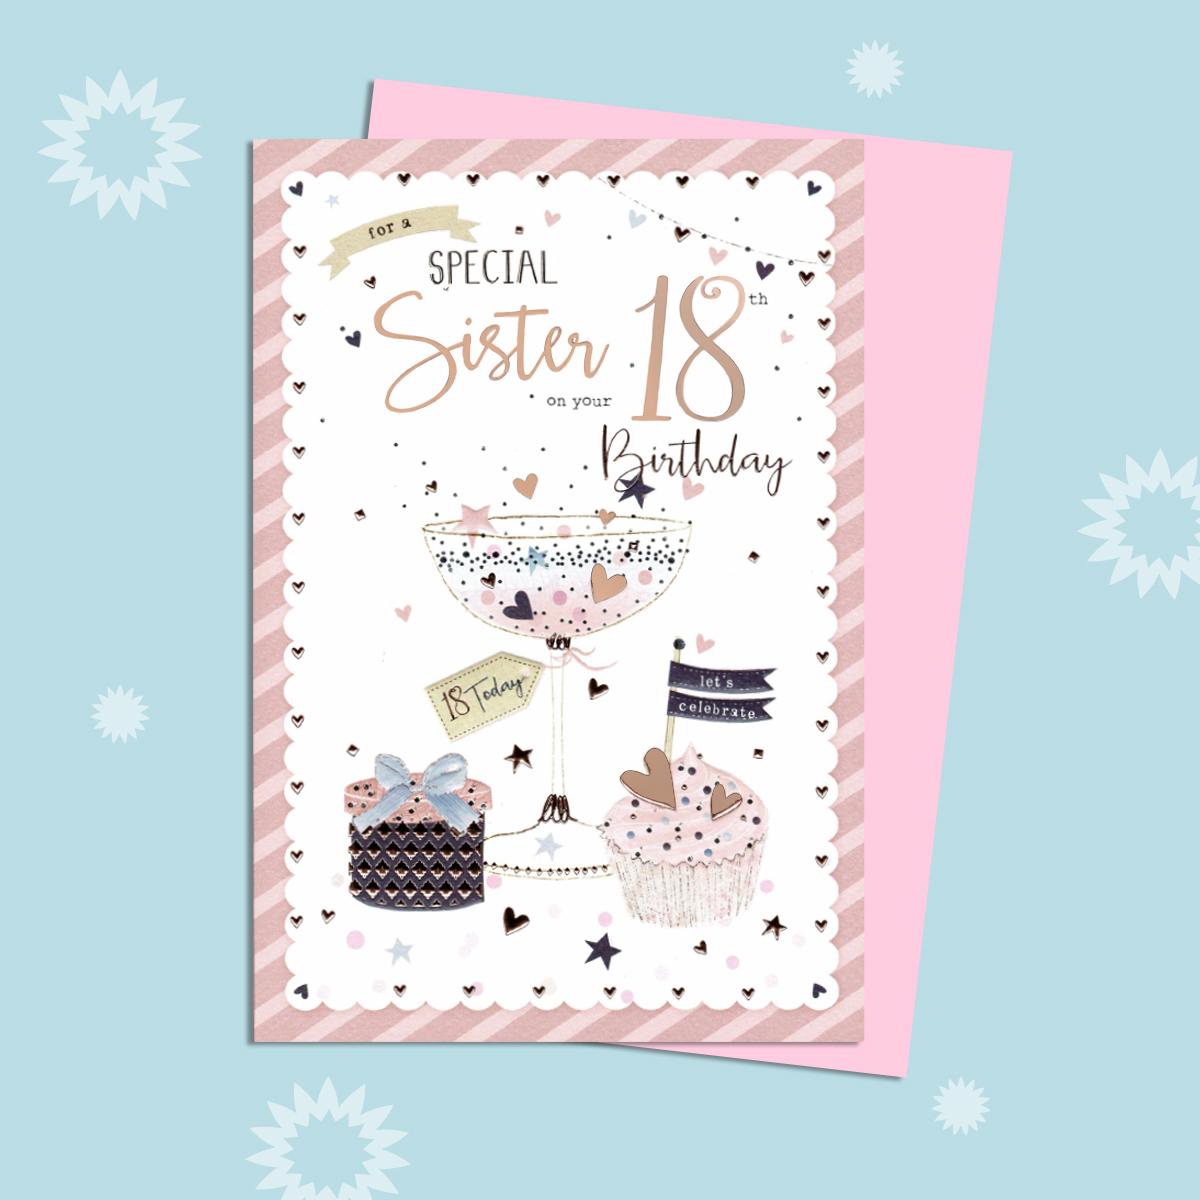 Special Sister 18th Birthday Card Alongside Its Light Pink Envelope